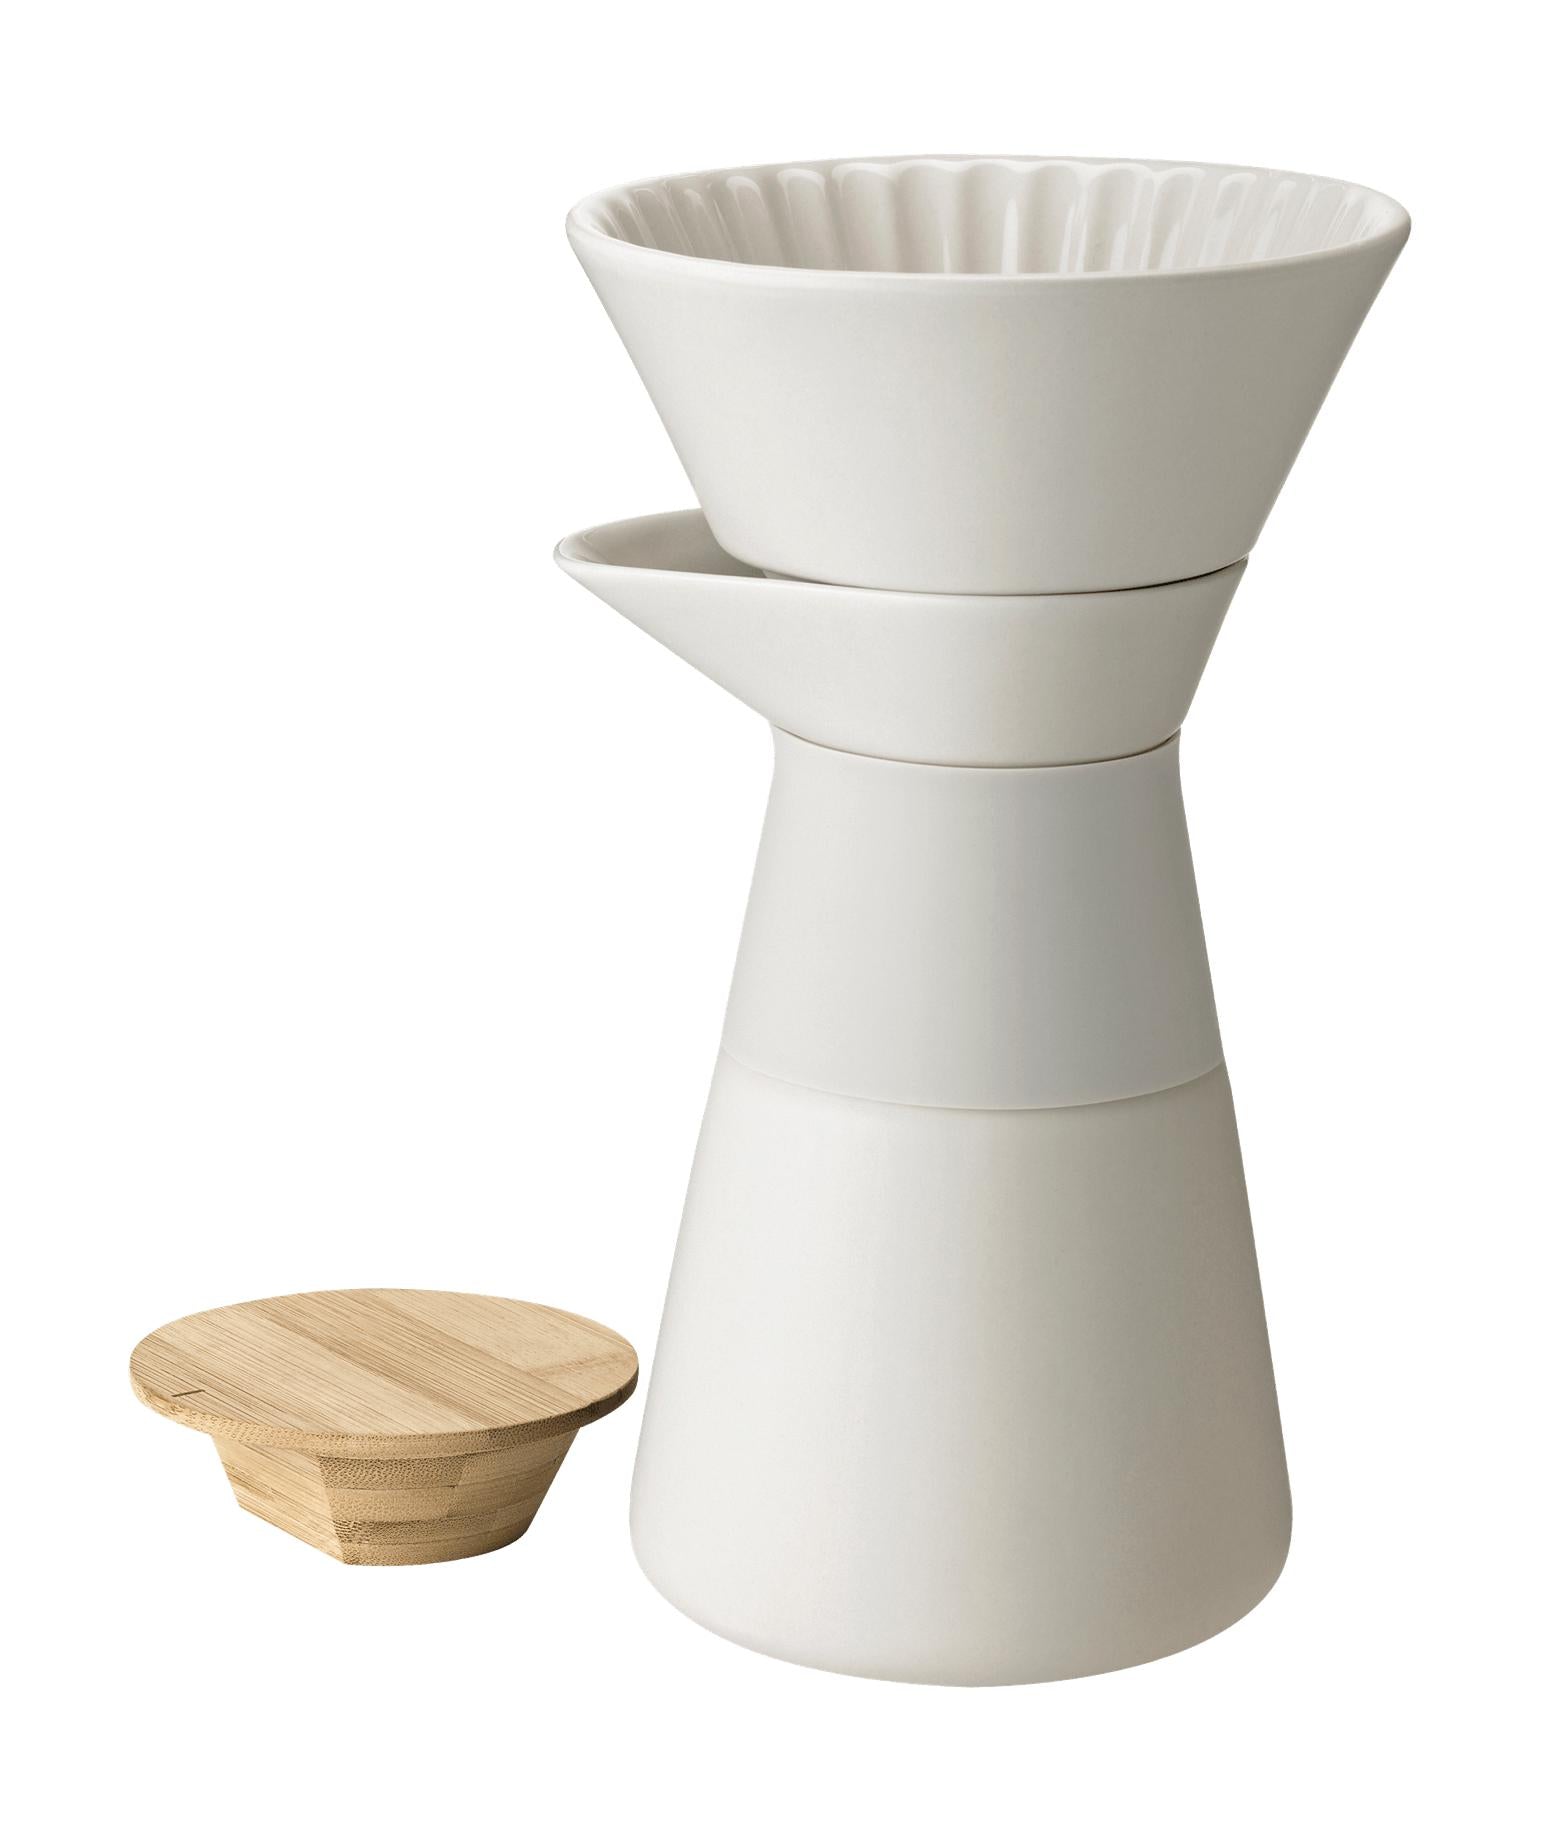 Stelton Theo Coffee Filter 0,6 L, Sand